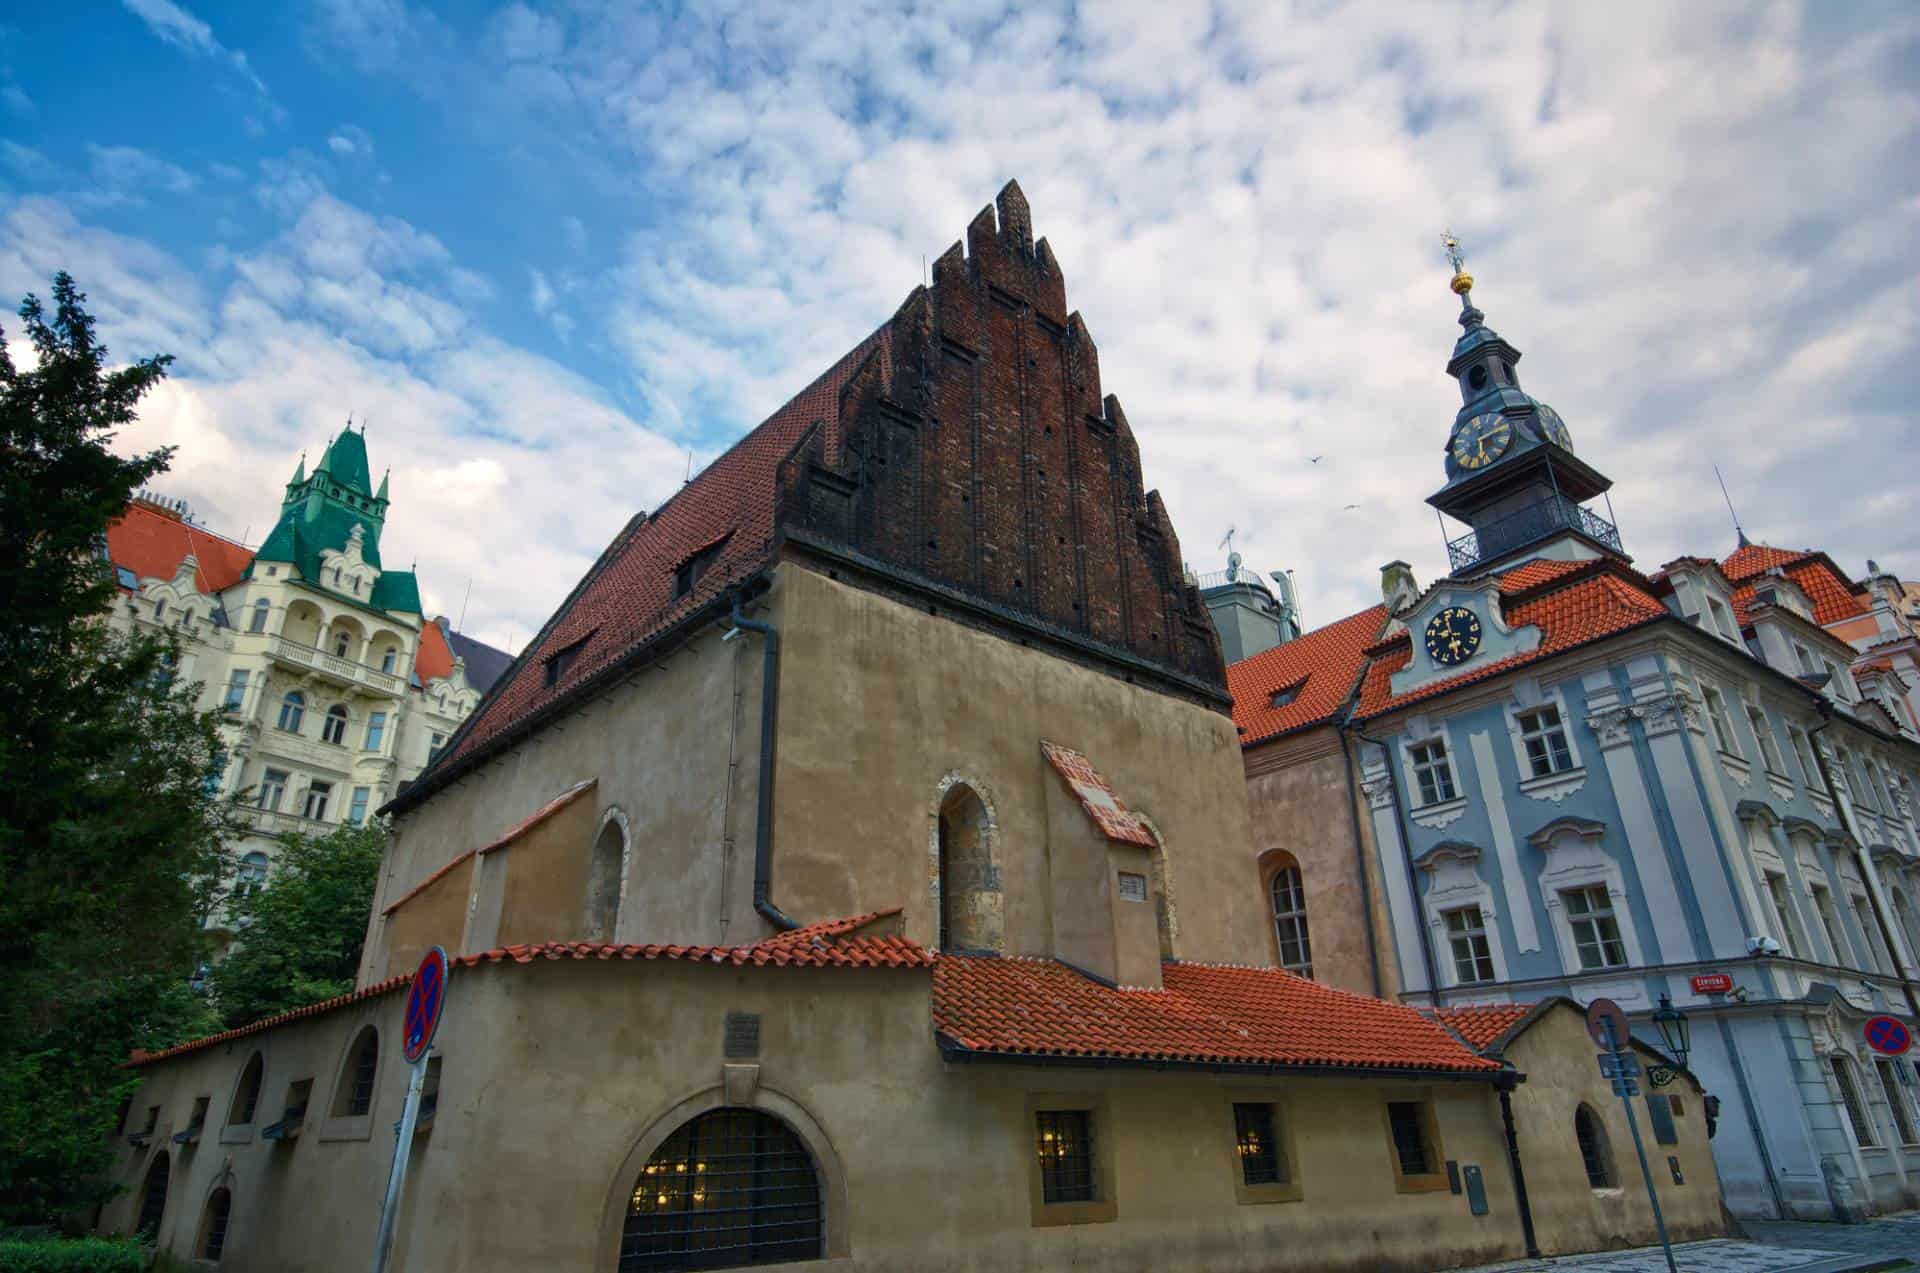 The Old New Synagogue, also called Staronová Synagoga, situated in Josefov, Prague, is Europe's oldest active synagogue.